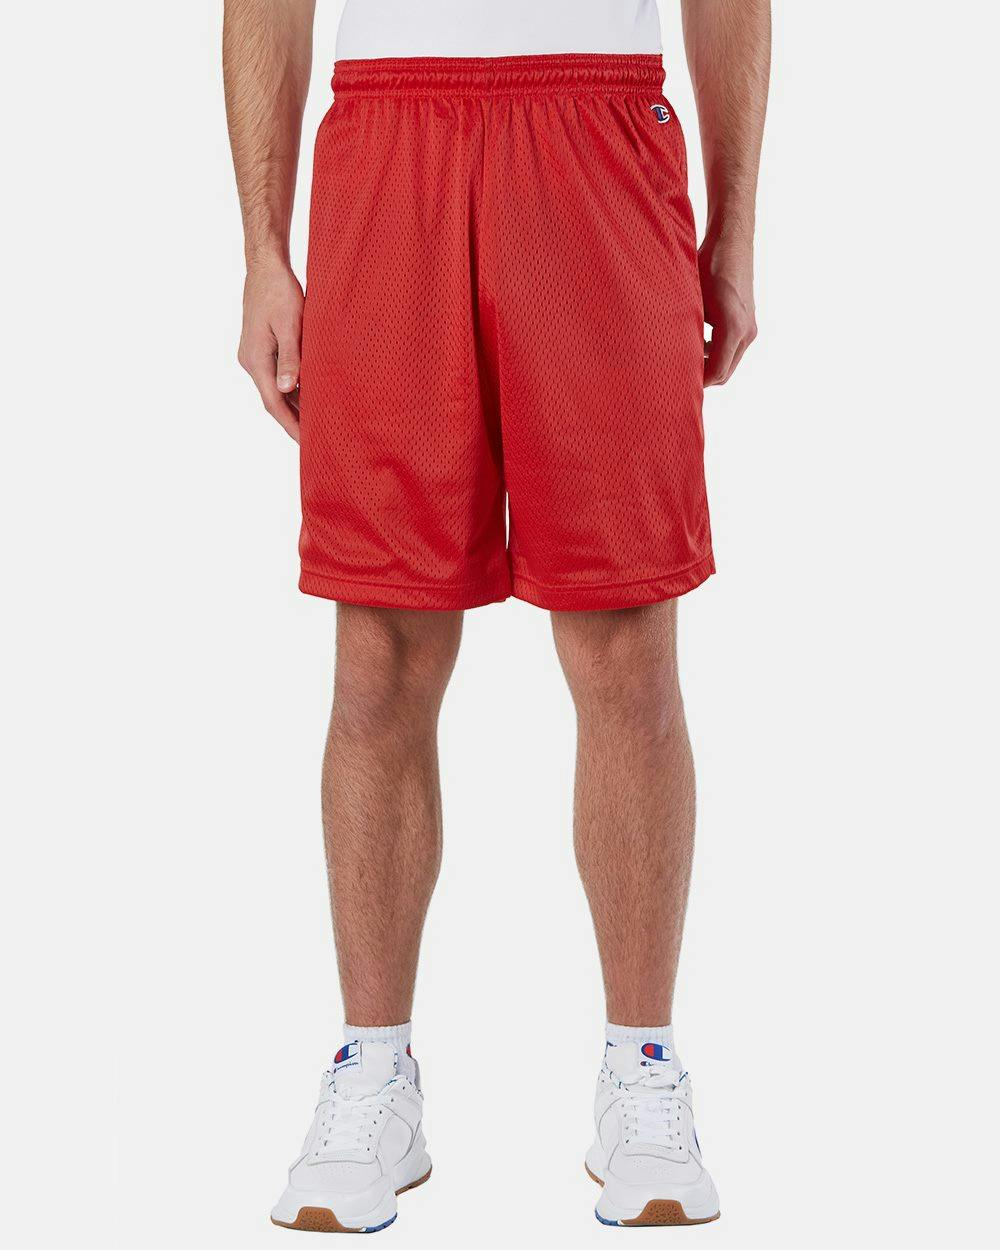 Image for Polyester Mesh 9" Shorts - 8731